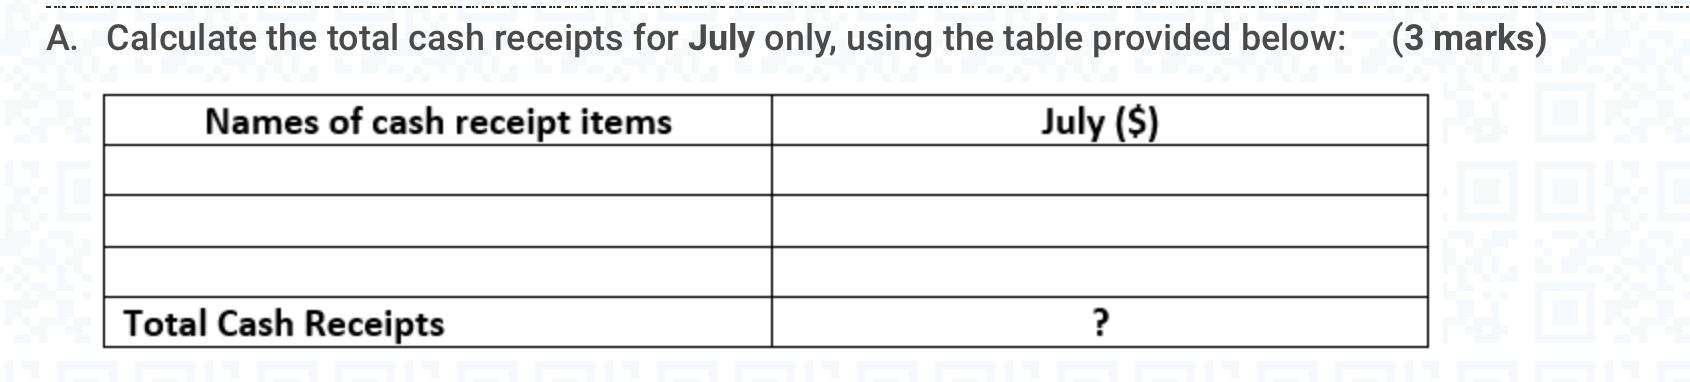 A. Calculate the total cash receipts for July only, using the table provided below: (3 marks) Names of cash receipt items Jul